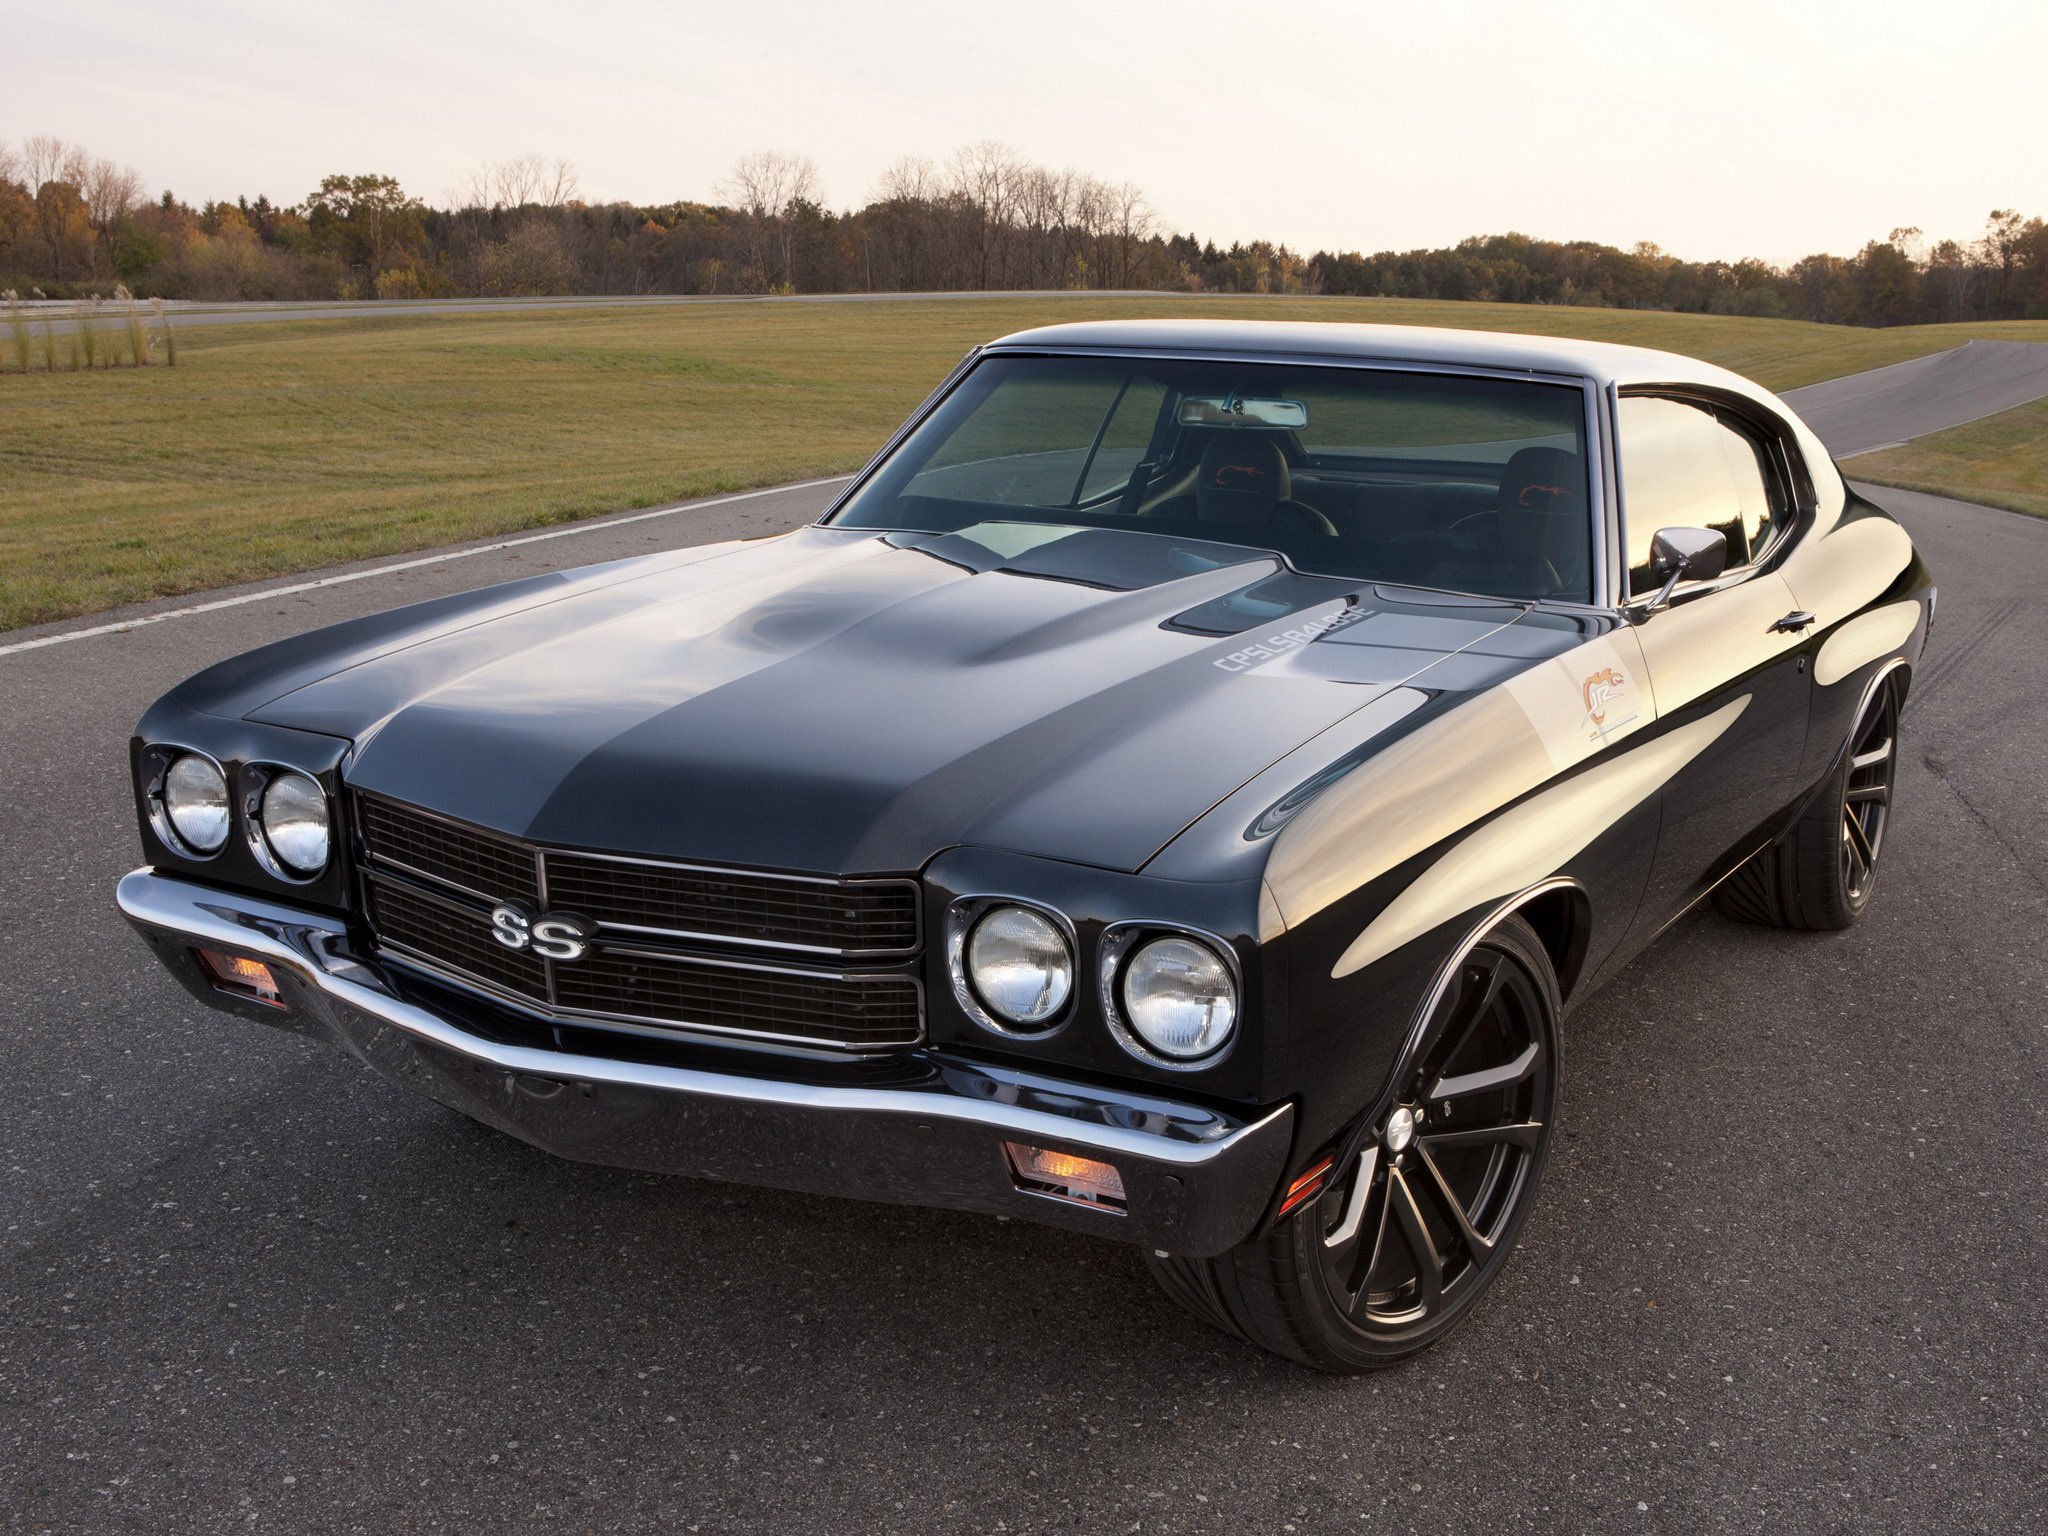 1969 Chevrolet Chevelle S S classic muscle hot rod rods wallpaper 2048x1536